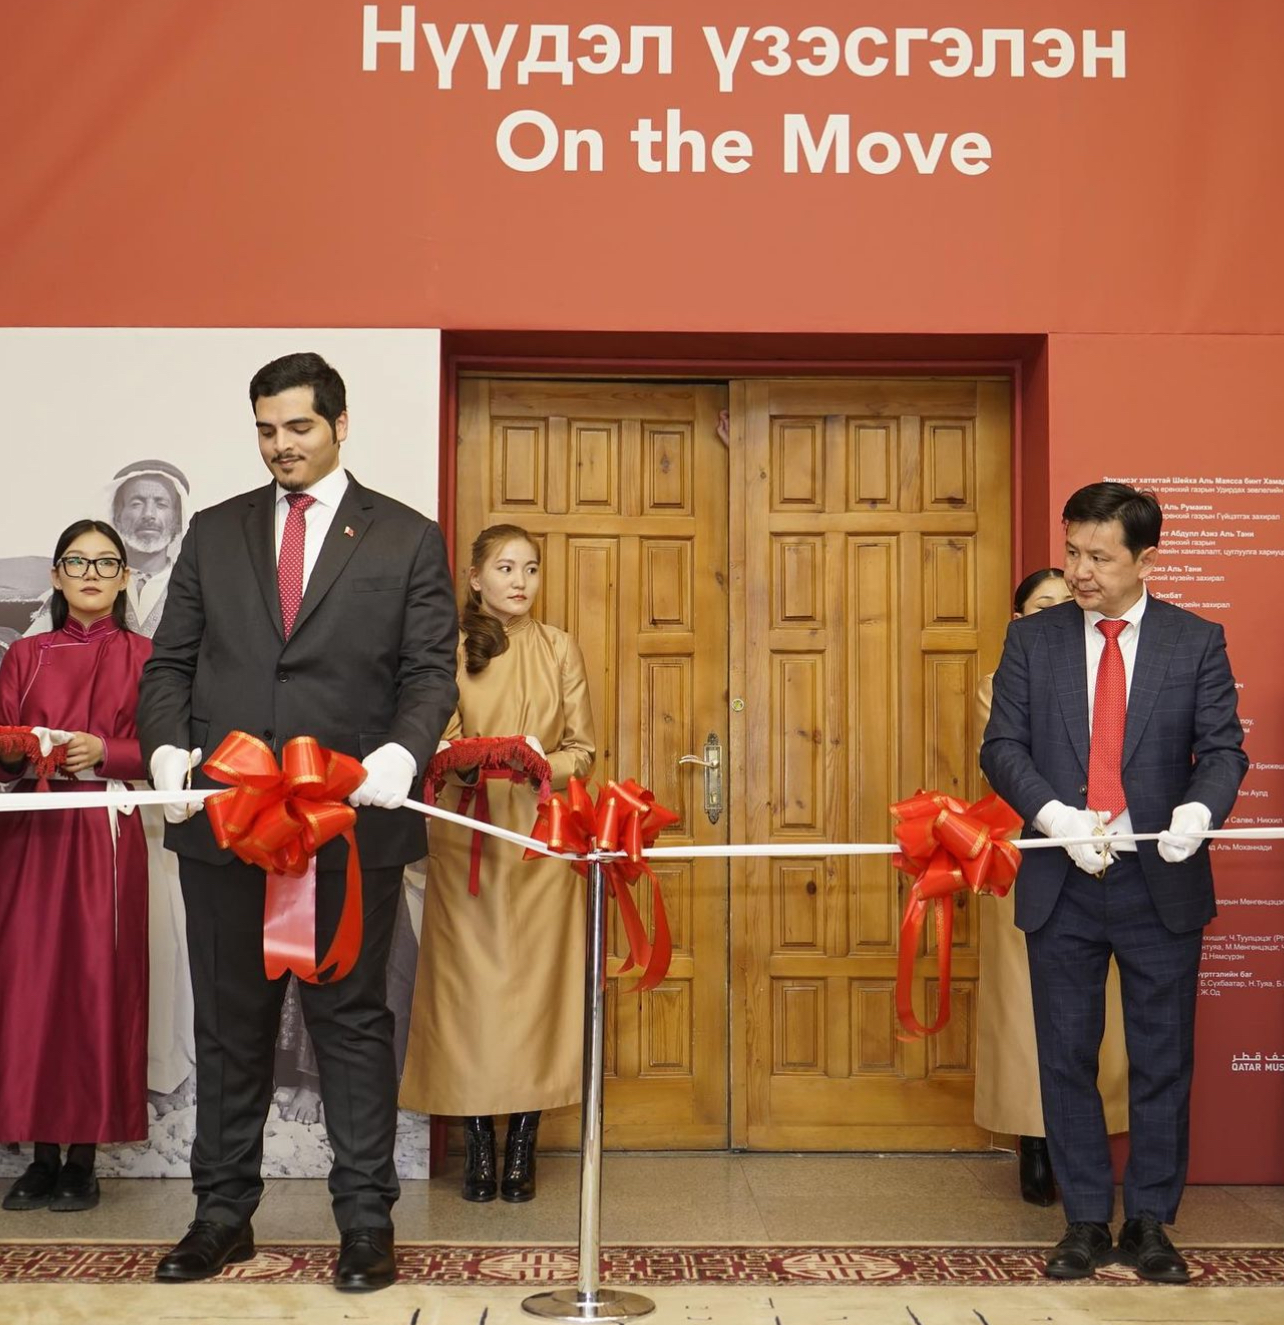 Qatar National Museum’s first travelling exhibit unveiled in Mongolia